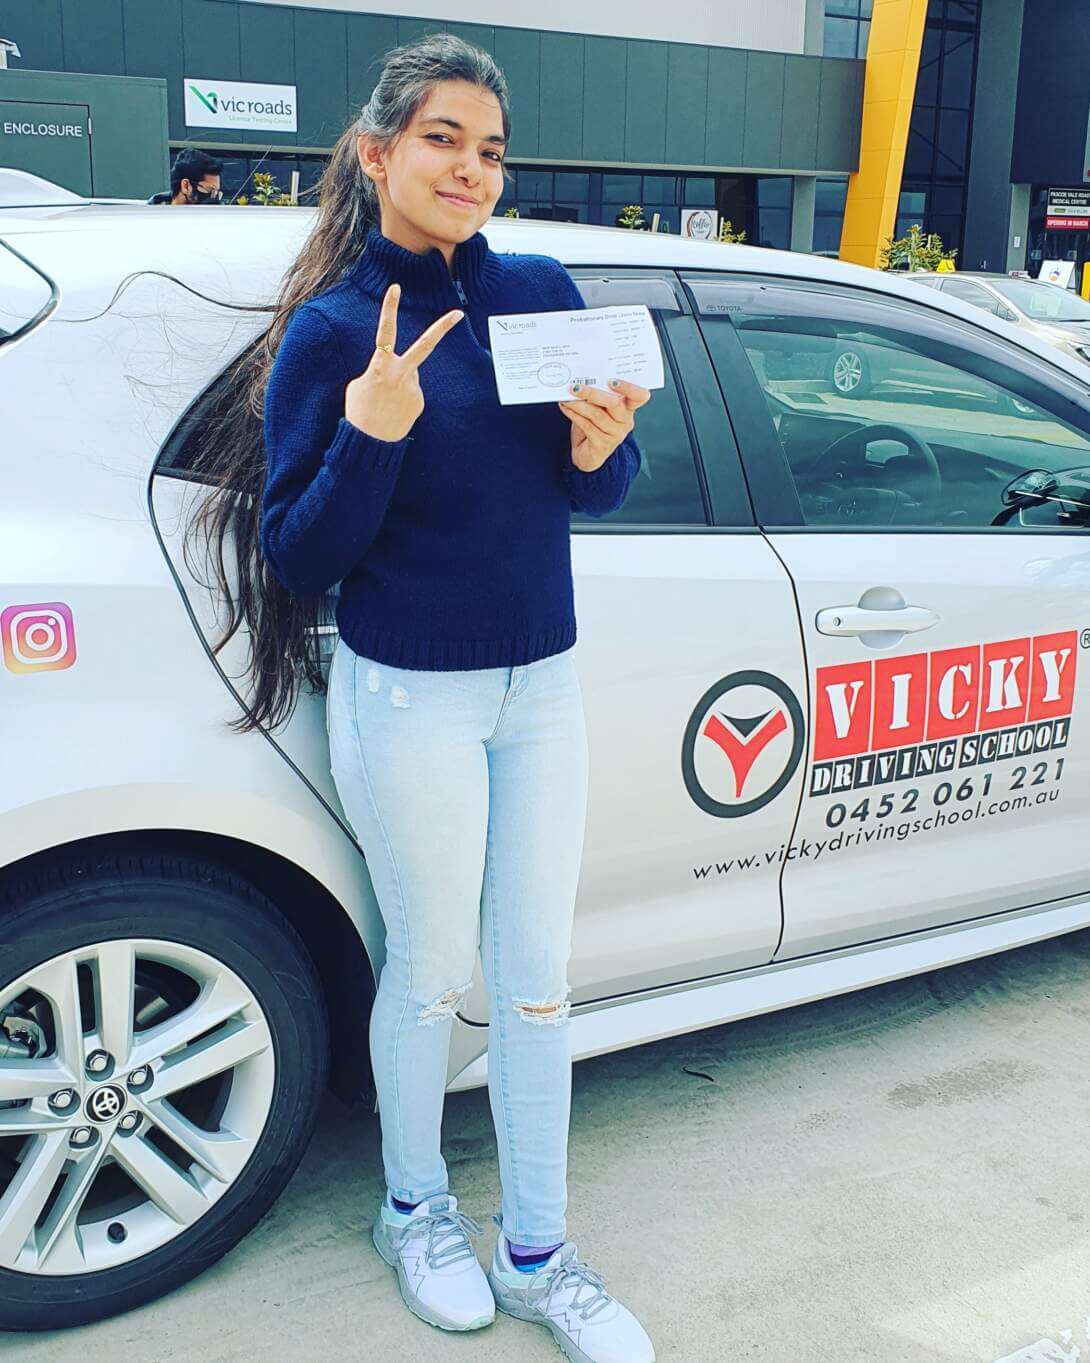 Vicky Driving School and Driving Instructors